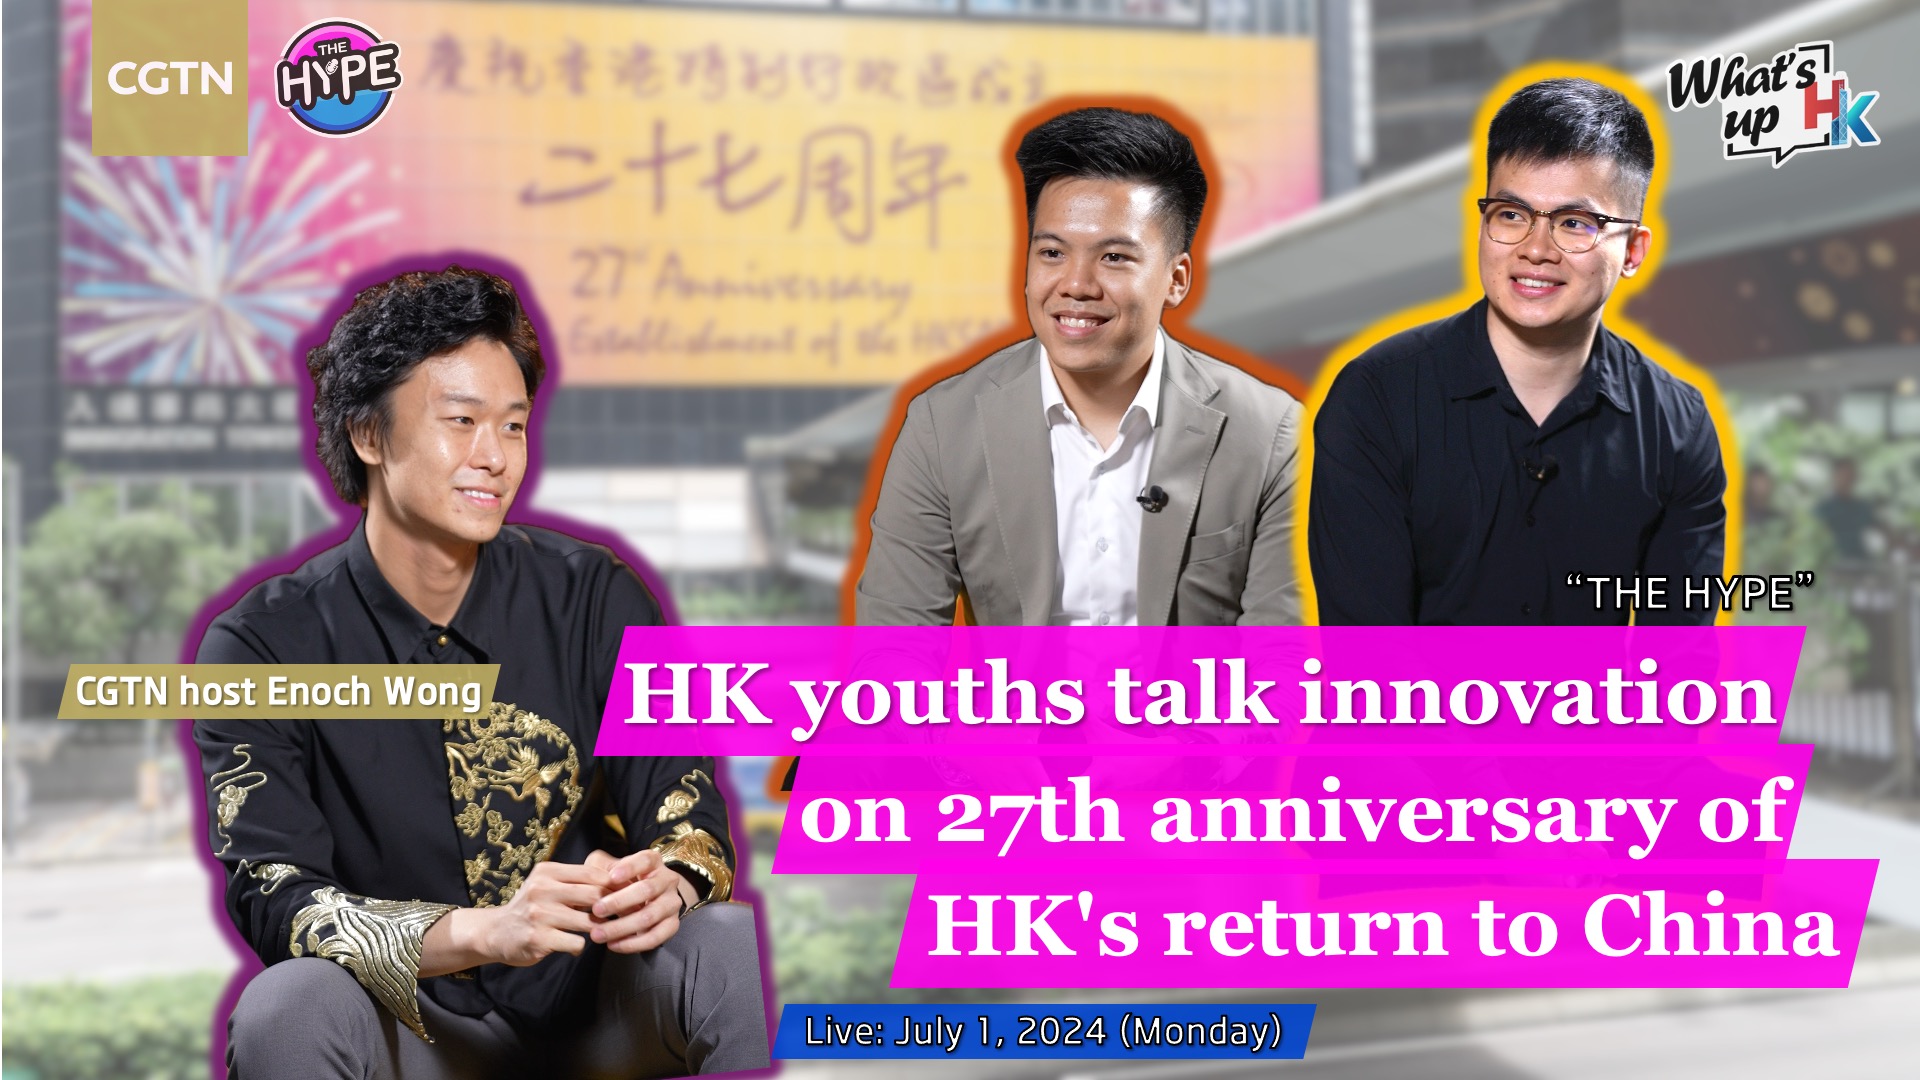 Watch: The Hype – HK youths talk innovation on 27th anniversary of HK's return to China